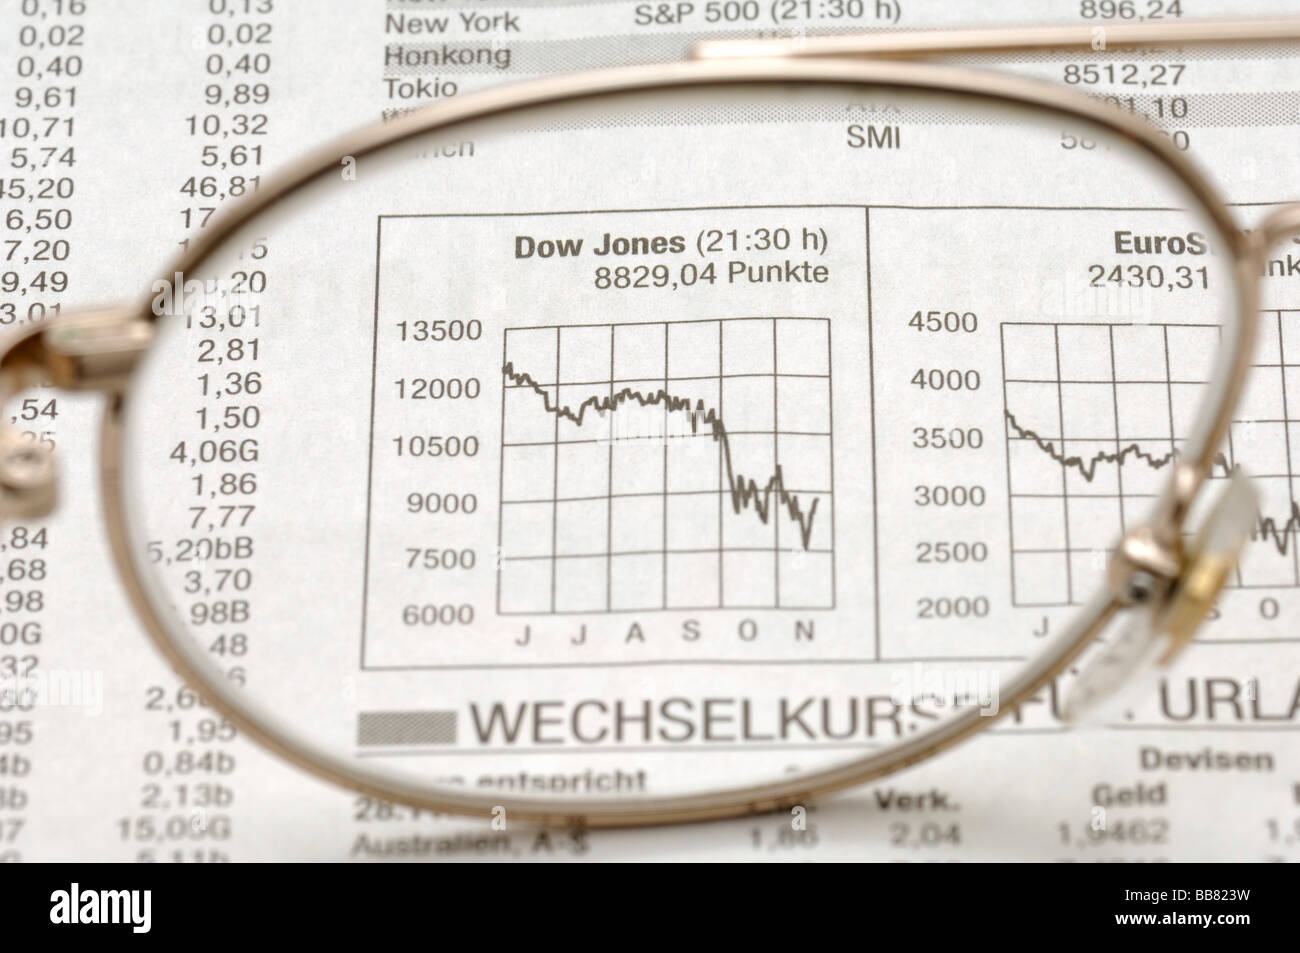 Glasses on the business section of a newspaper, stock exchange, symbolic picture for business Stock Photo